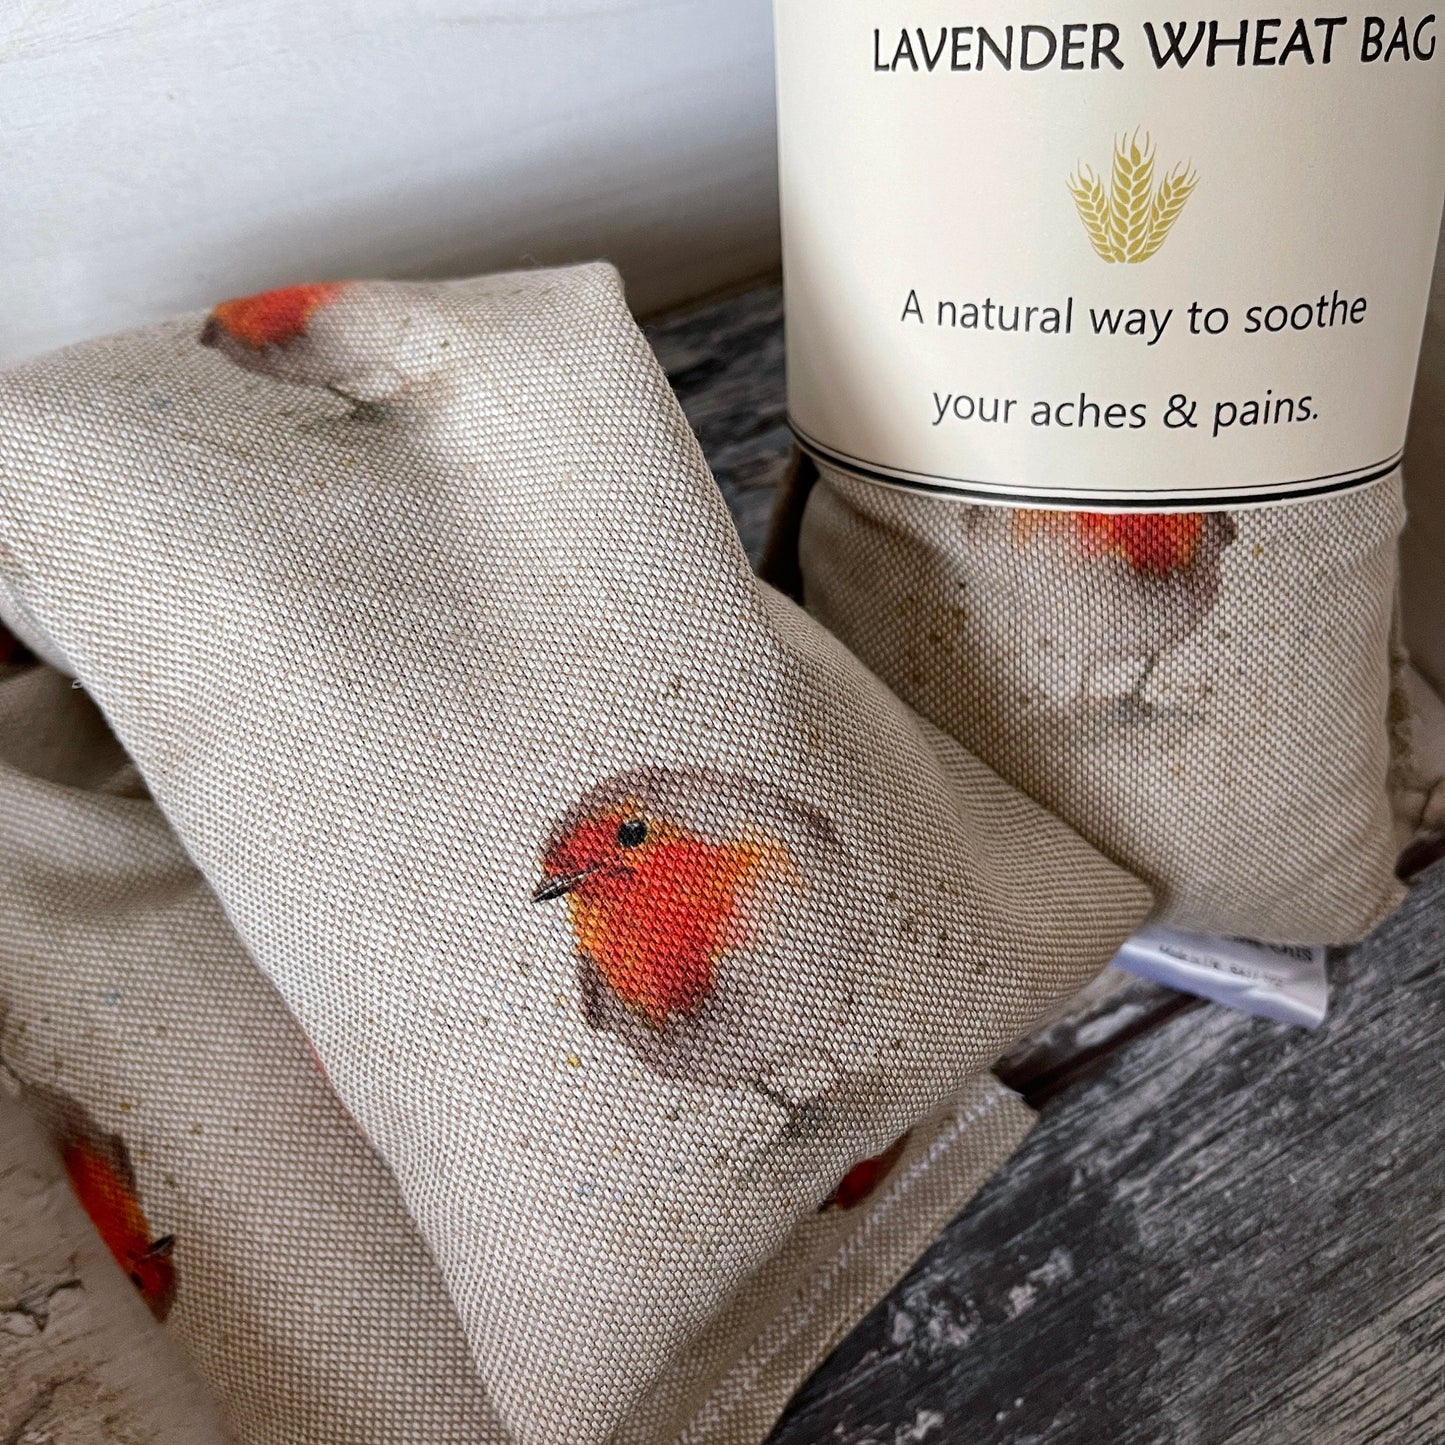 Robin Lavender scented wheat bags. Gardeners heat wrap body warmer. Heat pack comforter for snuggles